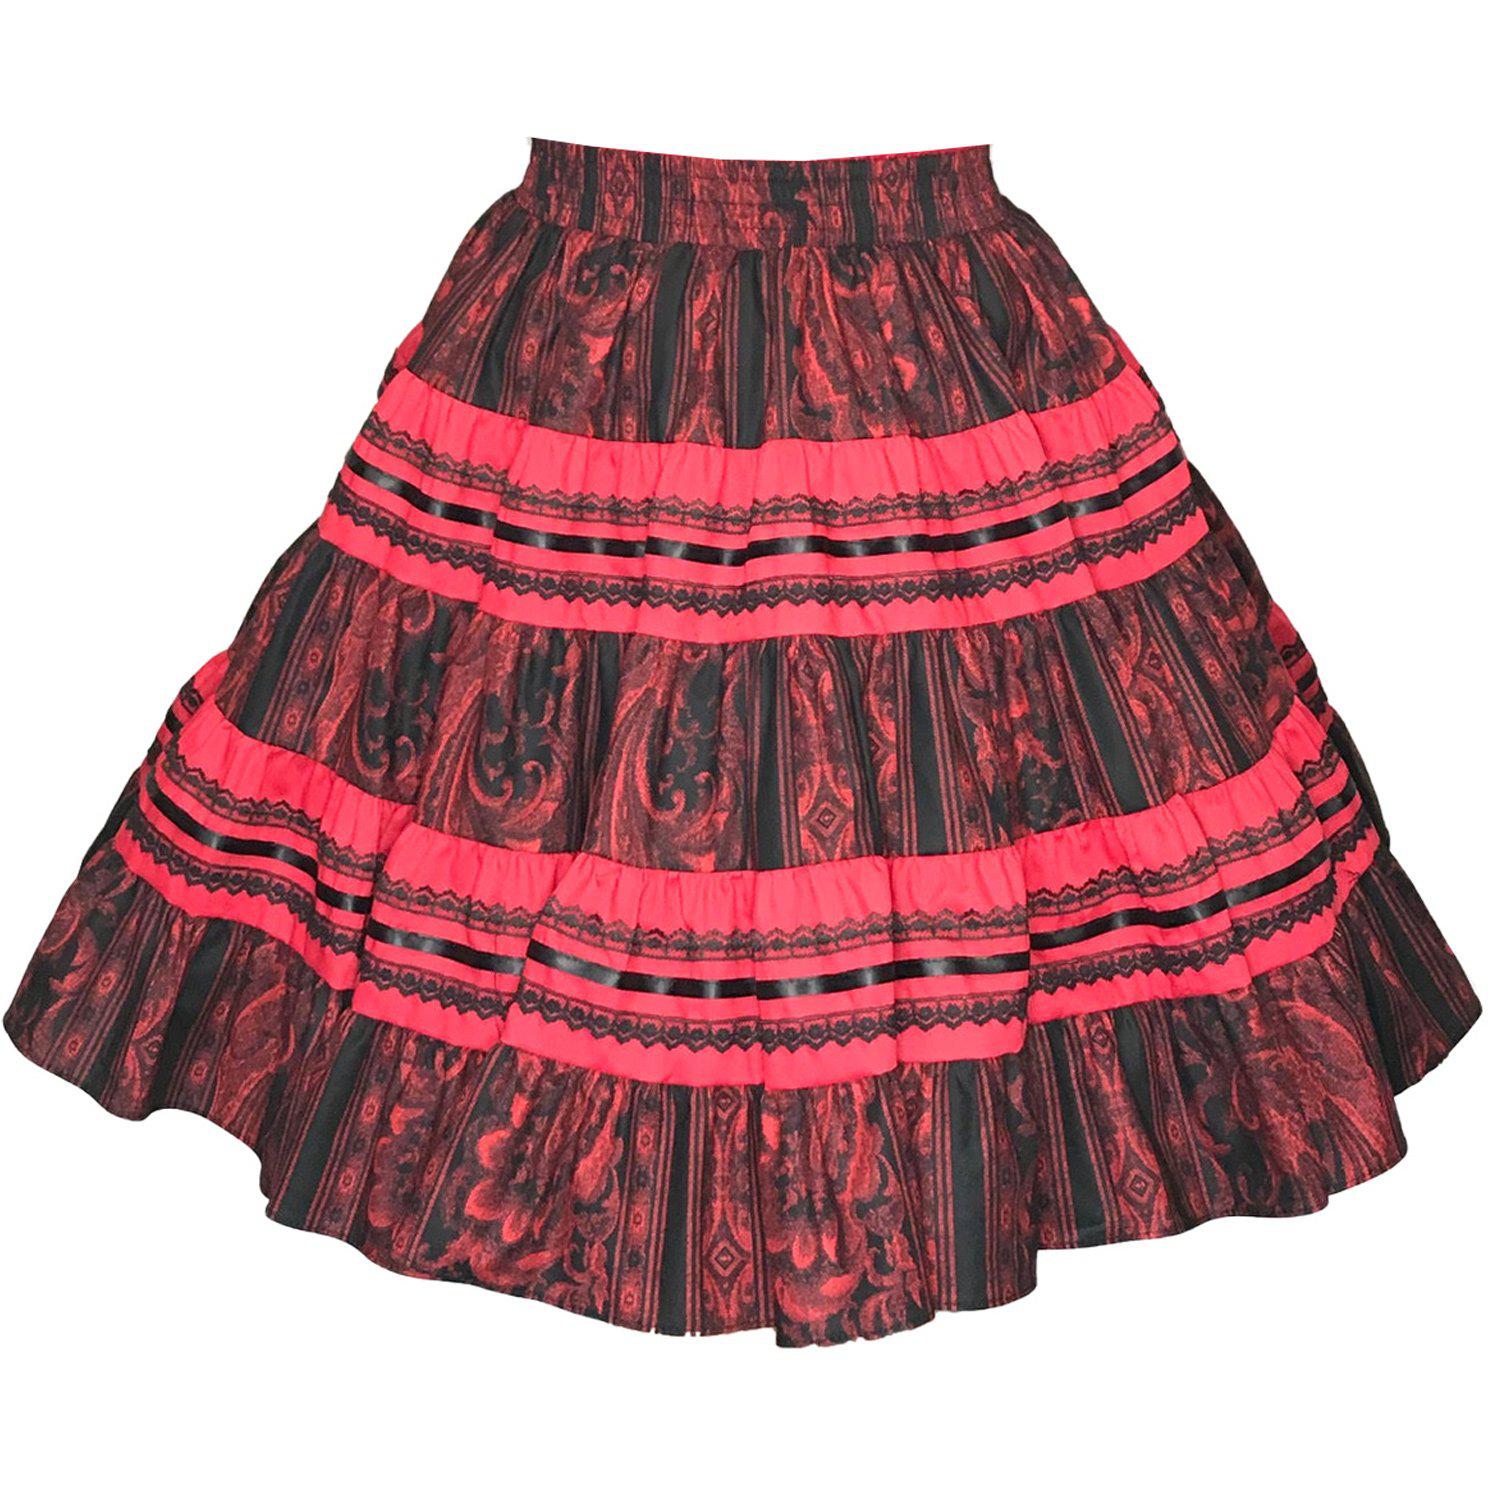 A Regal Print Square Dance Skirt made of stripe fabric in red and black, featuring ruffles, created by Square Up Fashions.